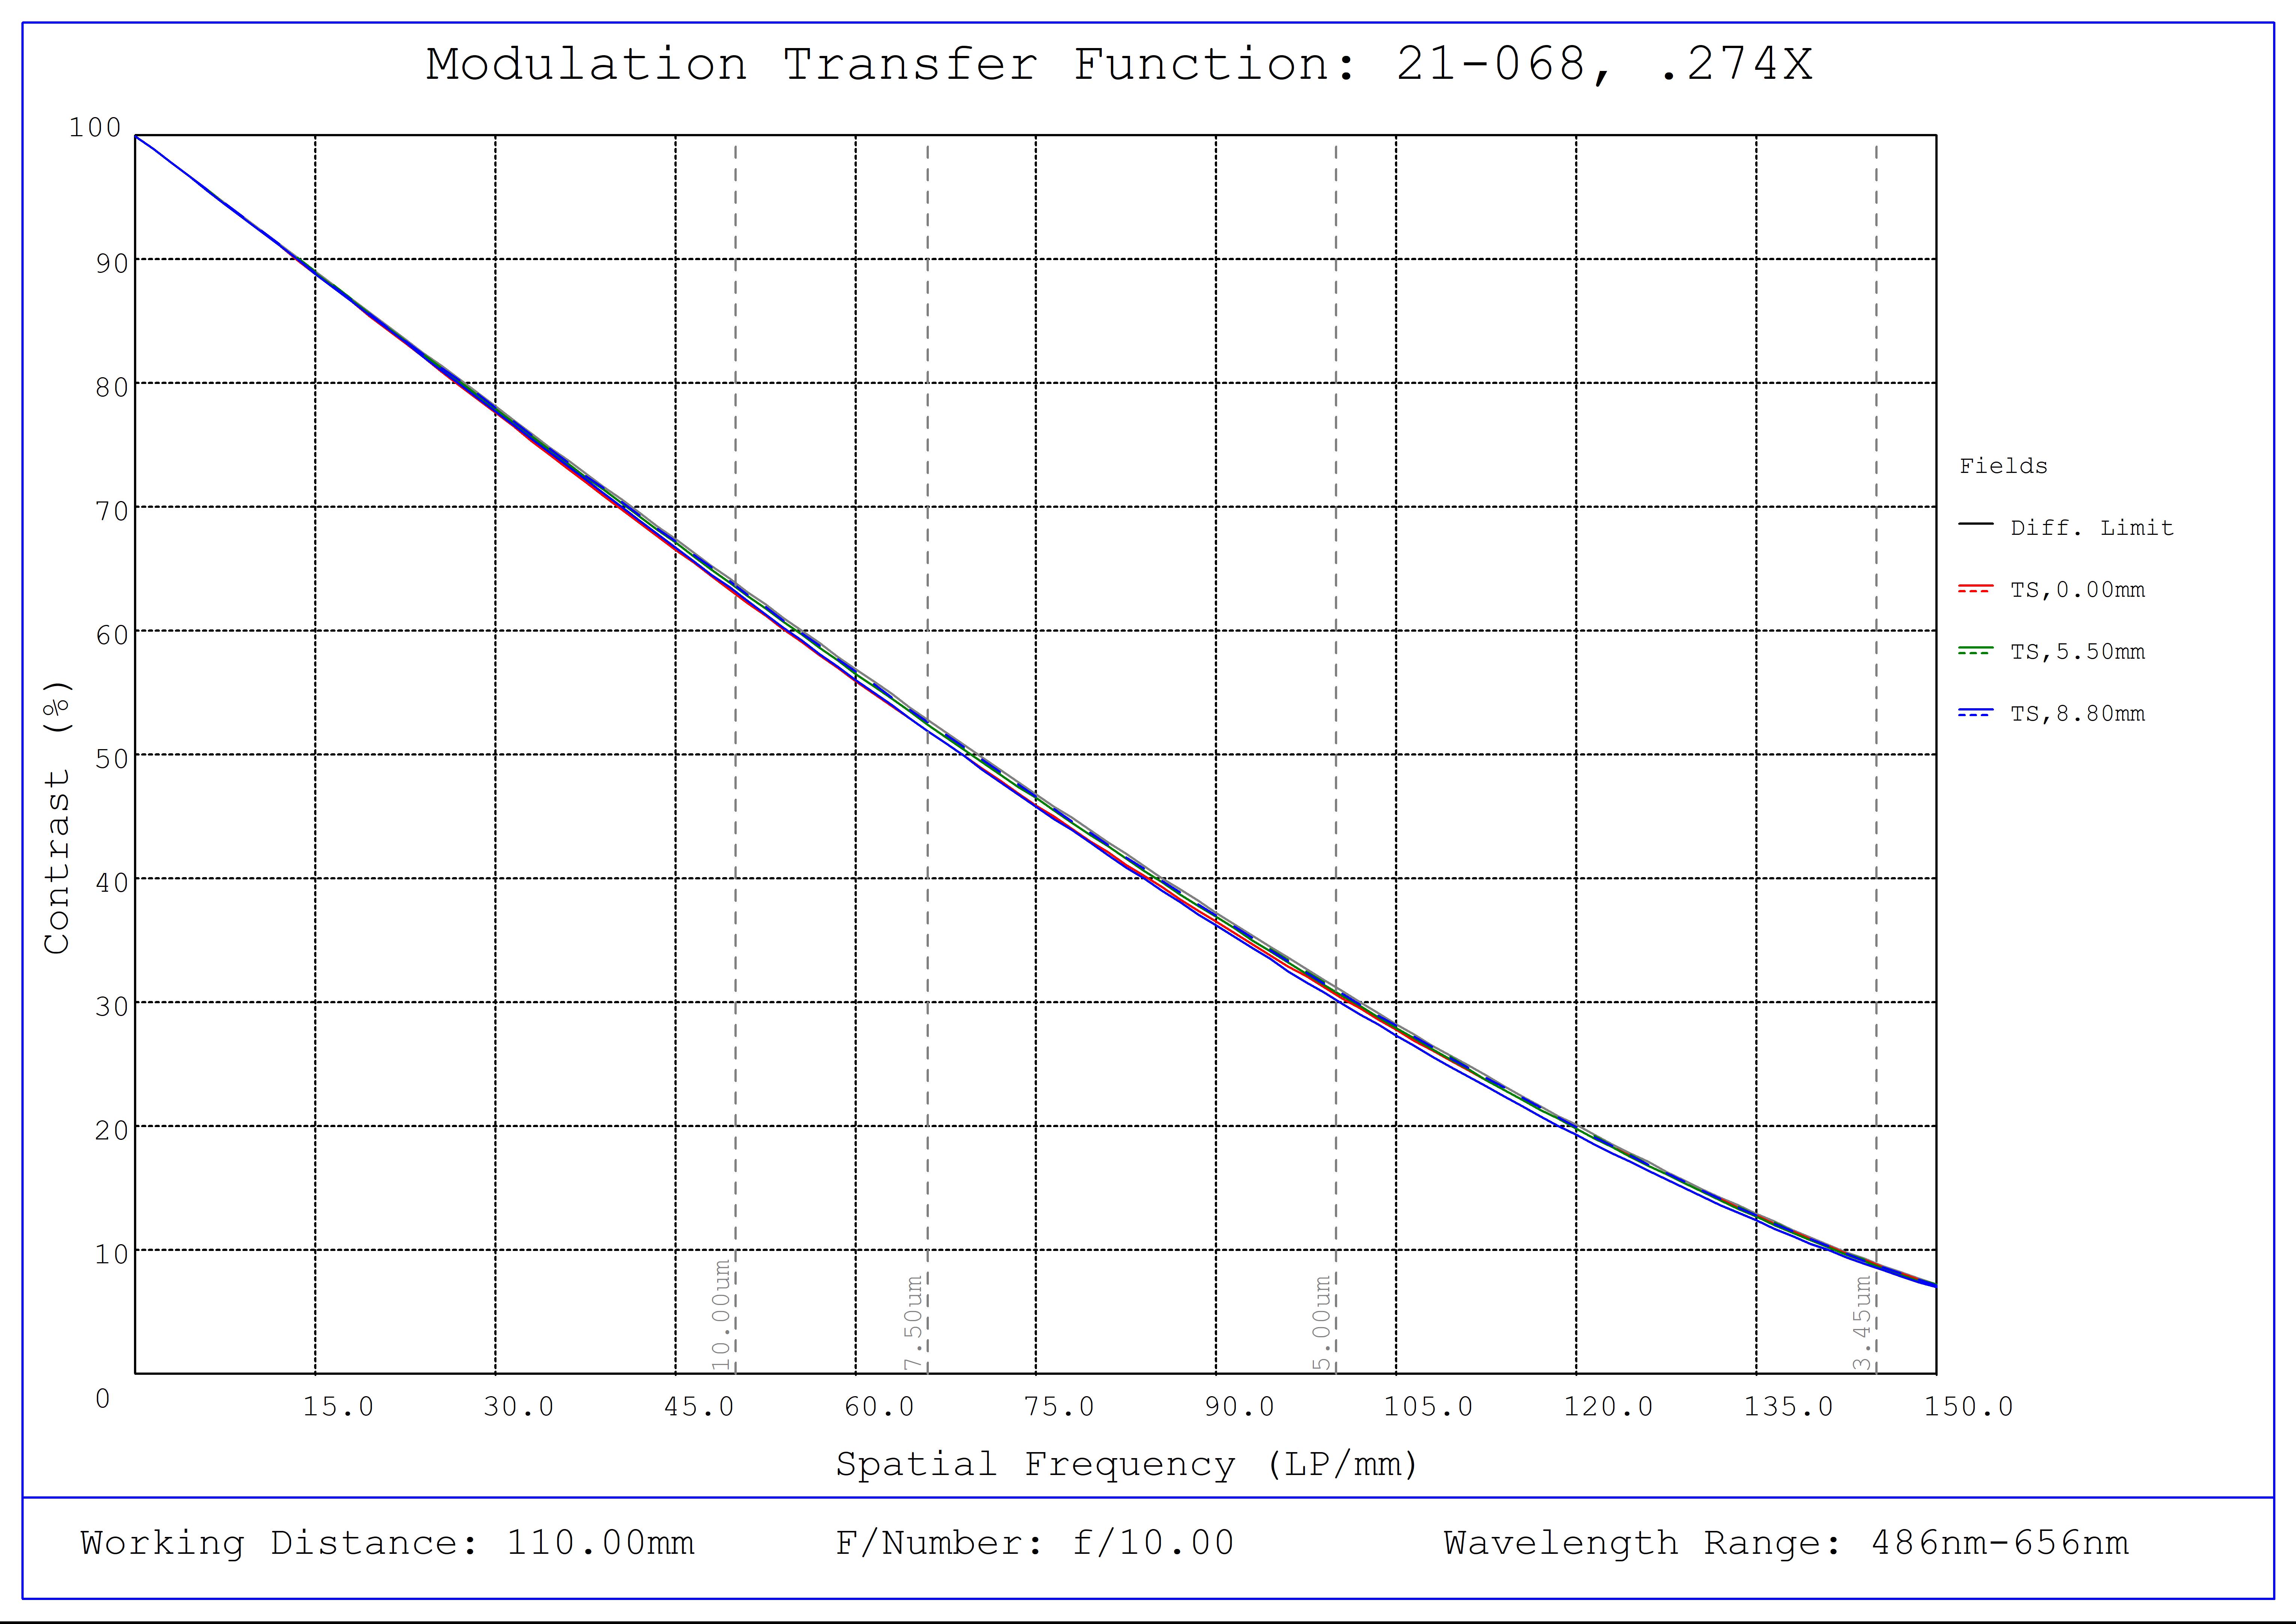 #21-068, 0.274X CobaltTL Telecentric Lens, Modulated Transfer Function (MTF) Plot, 110mm Working Distance, f10